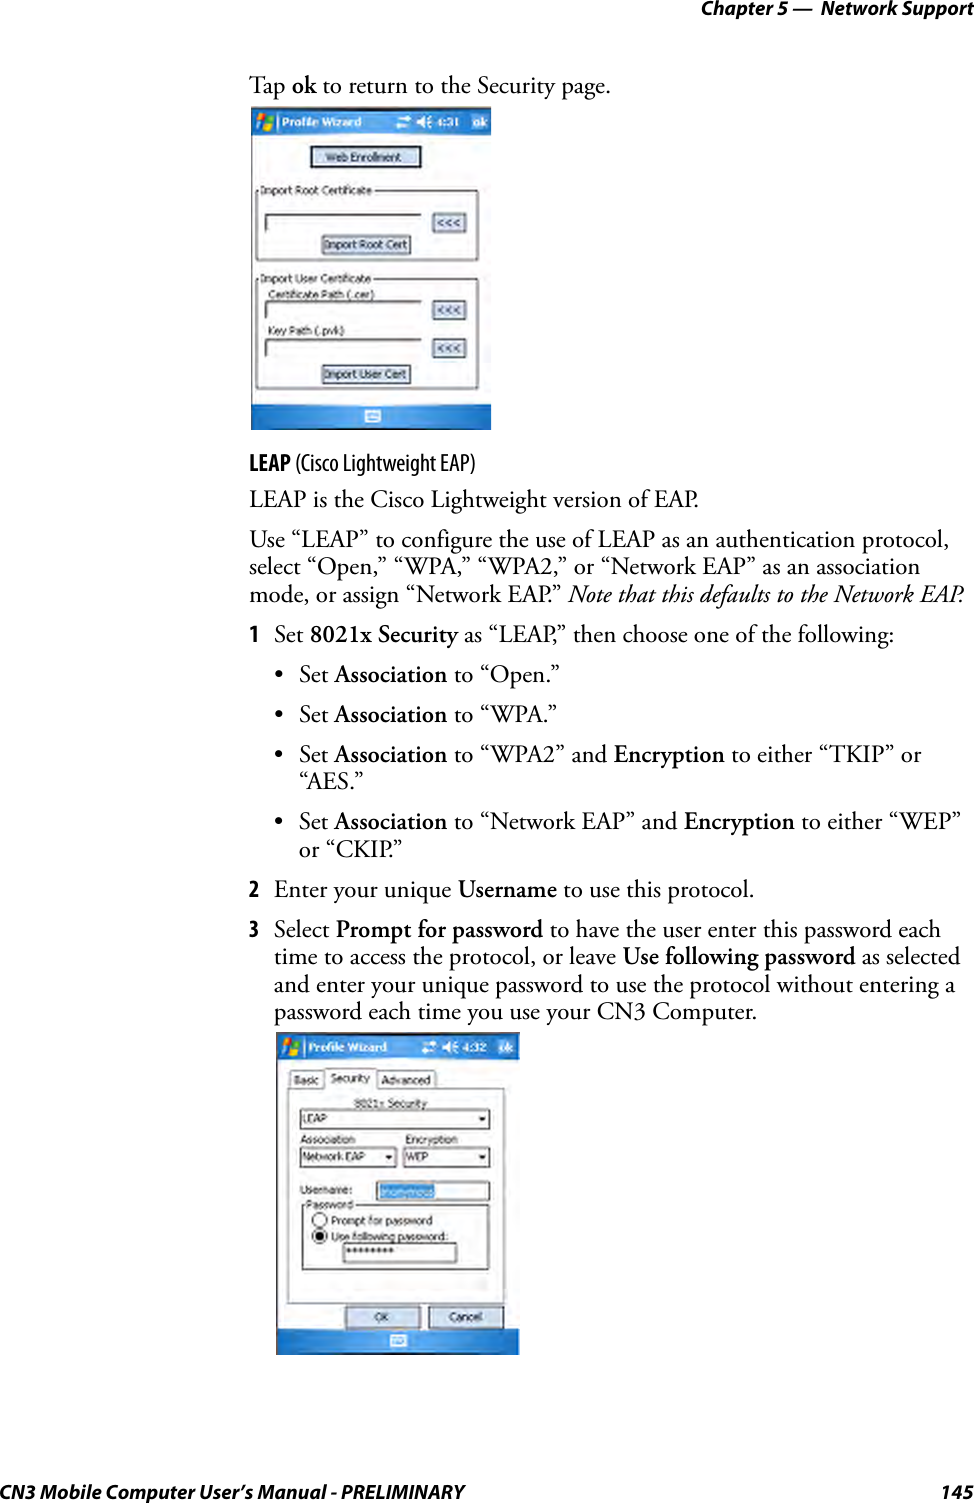 Chapter 5 —  Network SupportCN3 Mobile Computer User’s Manual - PRELIMINARY 145Tap  ok to return to the Security page.LEAP (Cisco Lightweight EAP)LEAP is the Cisco Lightweight version of EAP.Use “LEAP” to configure the use of LEAP as an authentication protocol, select “Open,” “WPA,” “WPA2,” or “Network EAP” as an association mode, or assign “Network EAP.” Note that this defaults to the Network EAP.1Set 8021x Security as “LEAP,” then choose one of the following:•Set Association to “Open.”•Set Association to “WPA.”•Set Association to “WPA2” and Encryption to either “TKIP” or “AES.”•Set Association to “Network EAP” and Encryption to either “WEP” or “CKIP.”2Enter your unique Username to use this protocol.3Select Prompt for password to have the user enter this password each time to access the protocol, or leave Use following password as selected and enter your unique password to use the protocol without entering a password each time you use your CN3 Computer.